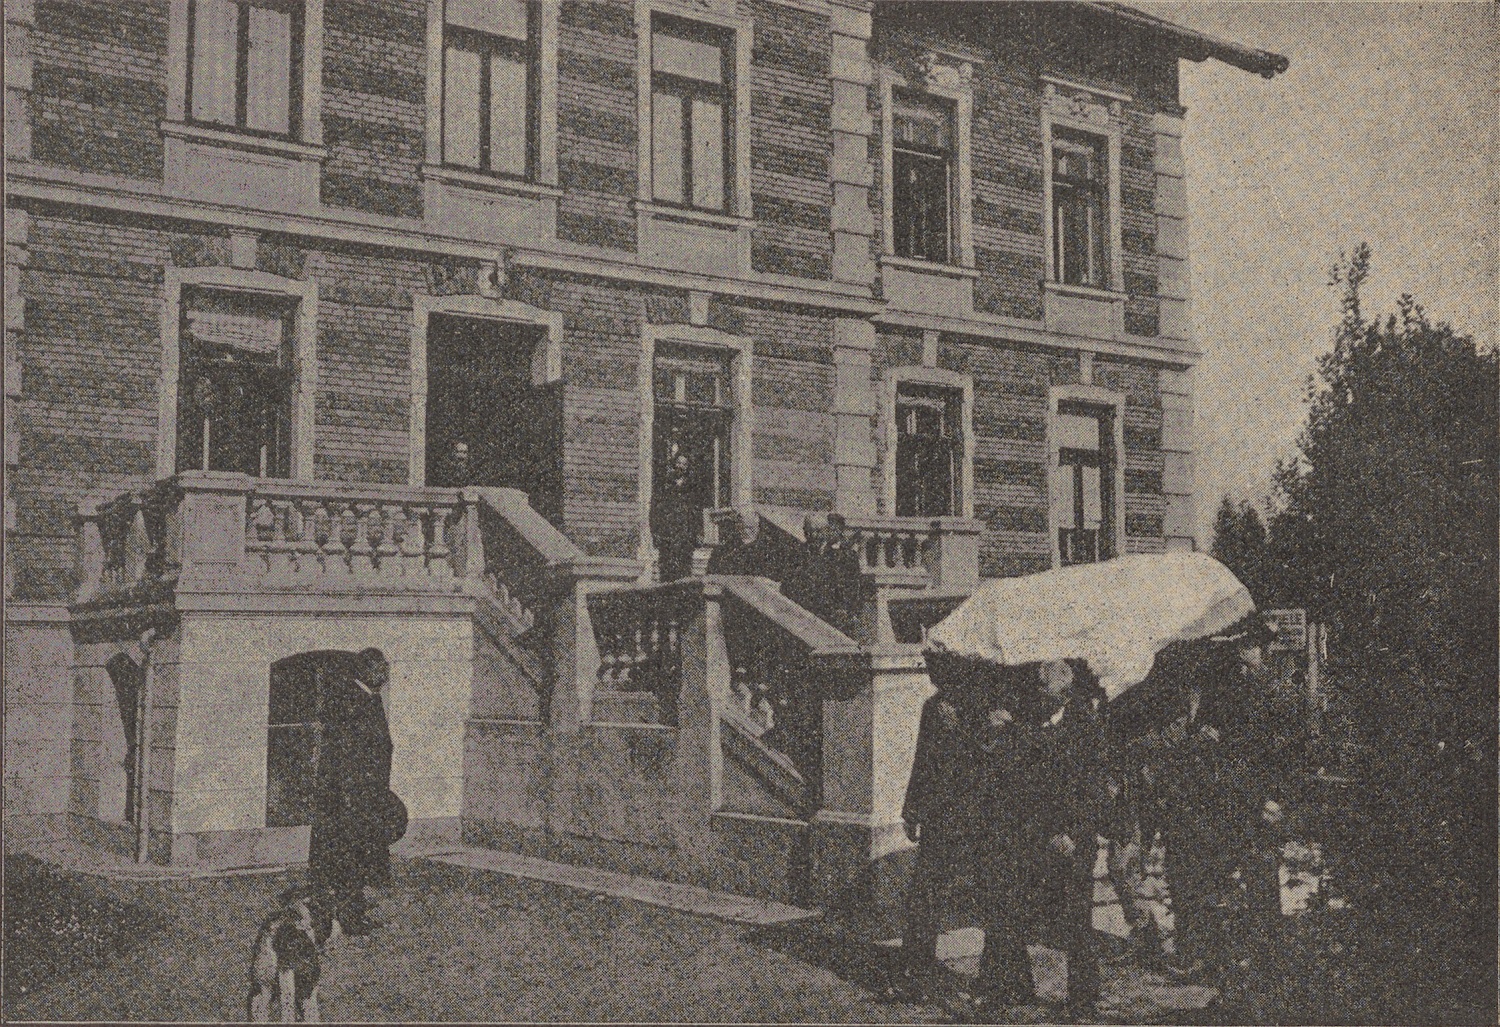 Coffin is taken out of the Kisielki institution